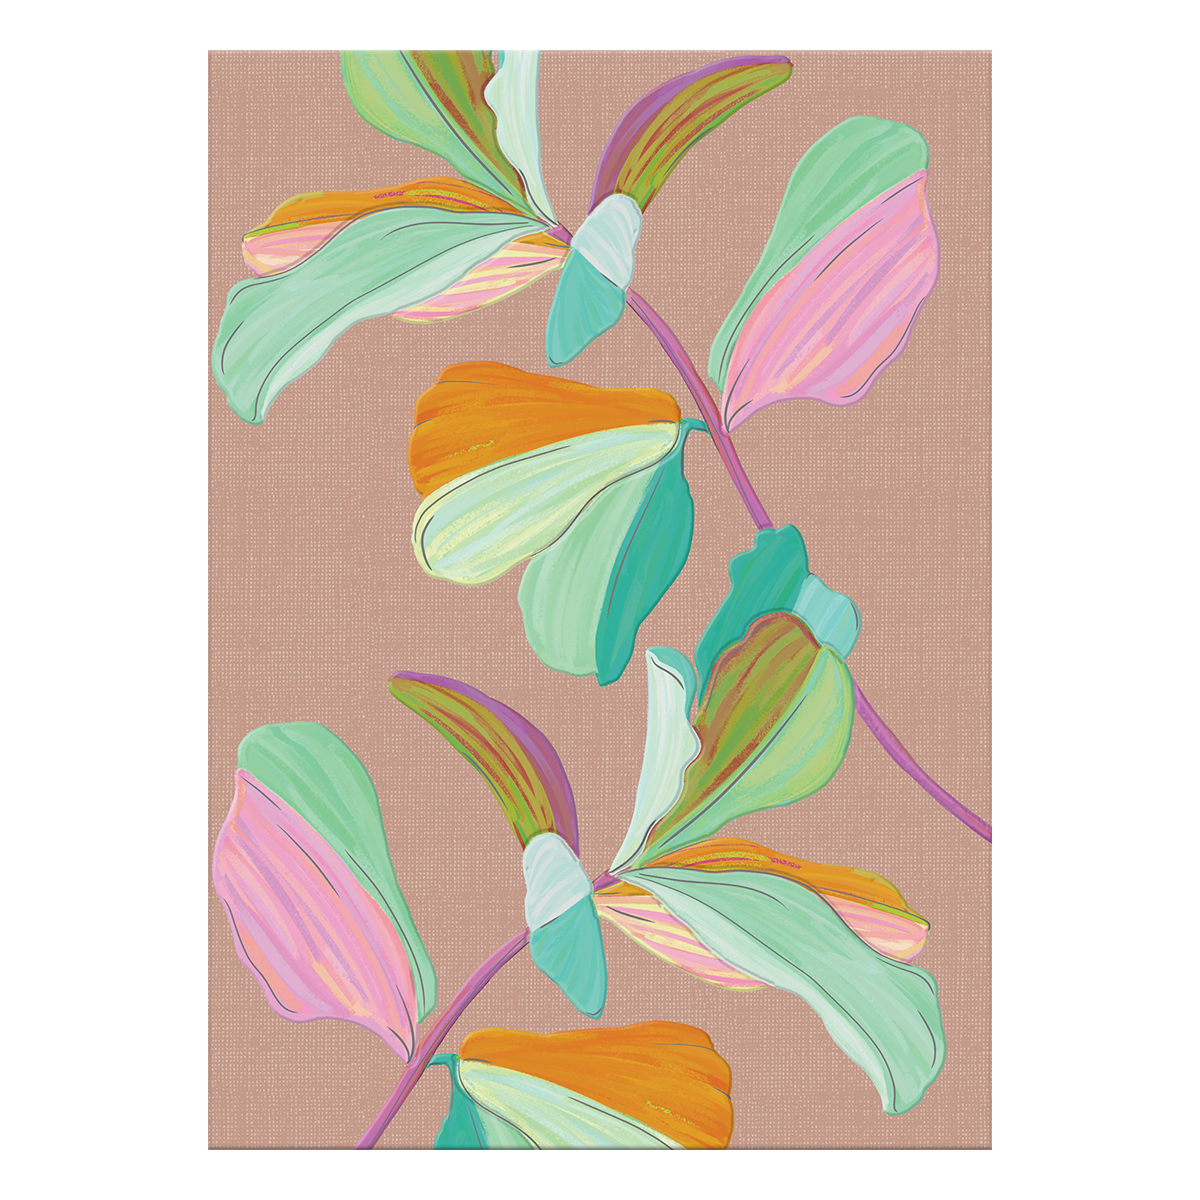 Floral Vines Greeting Card Product